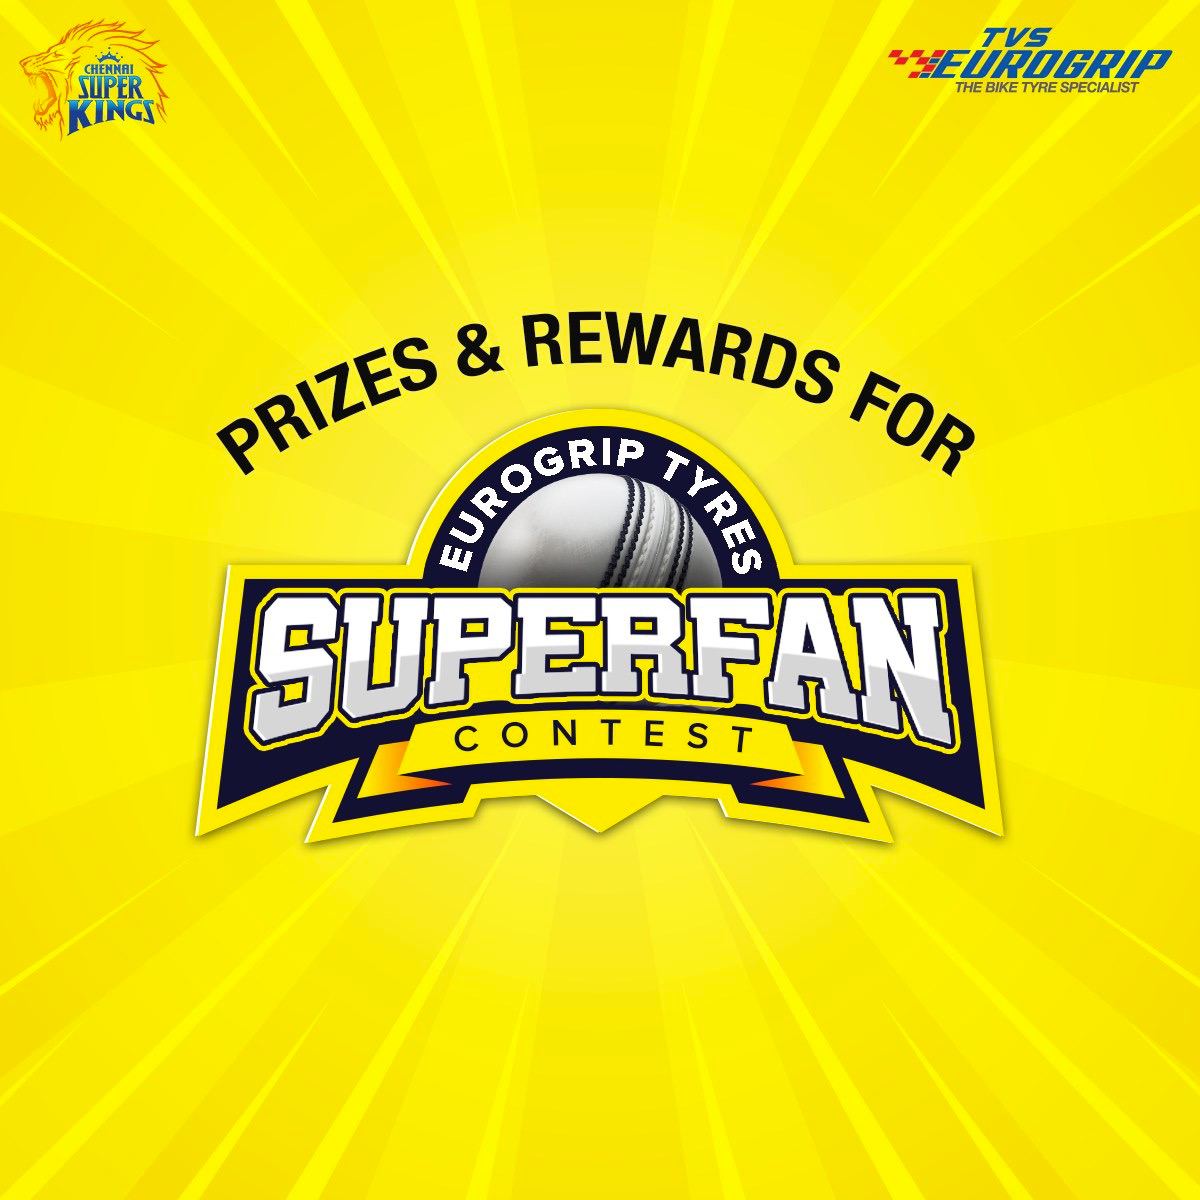 Win FREE CSK Merchandise from TVS Superfan contest on Facebook